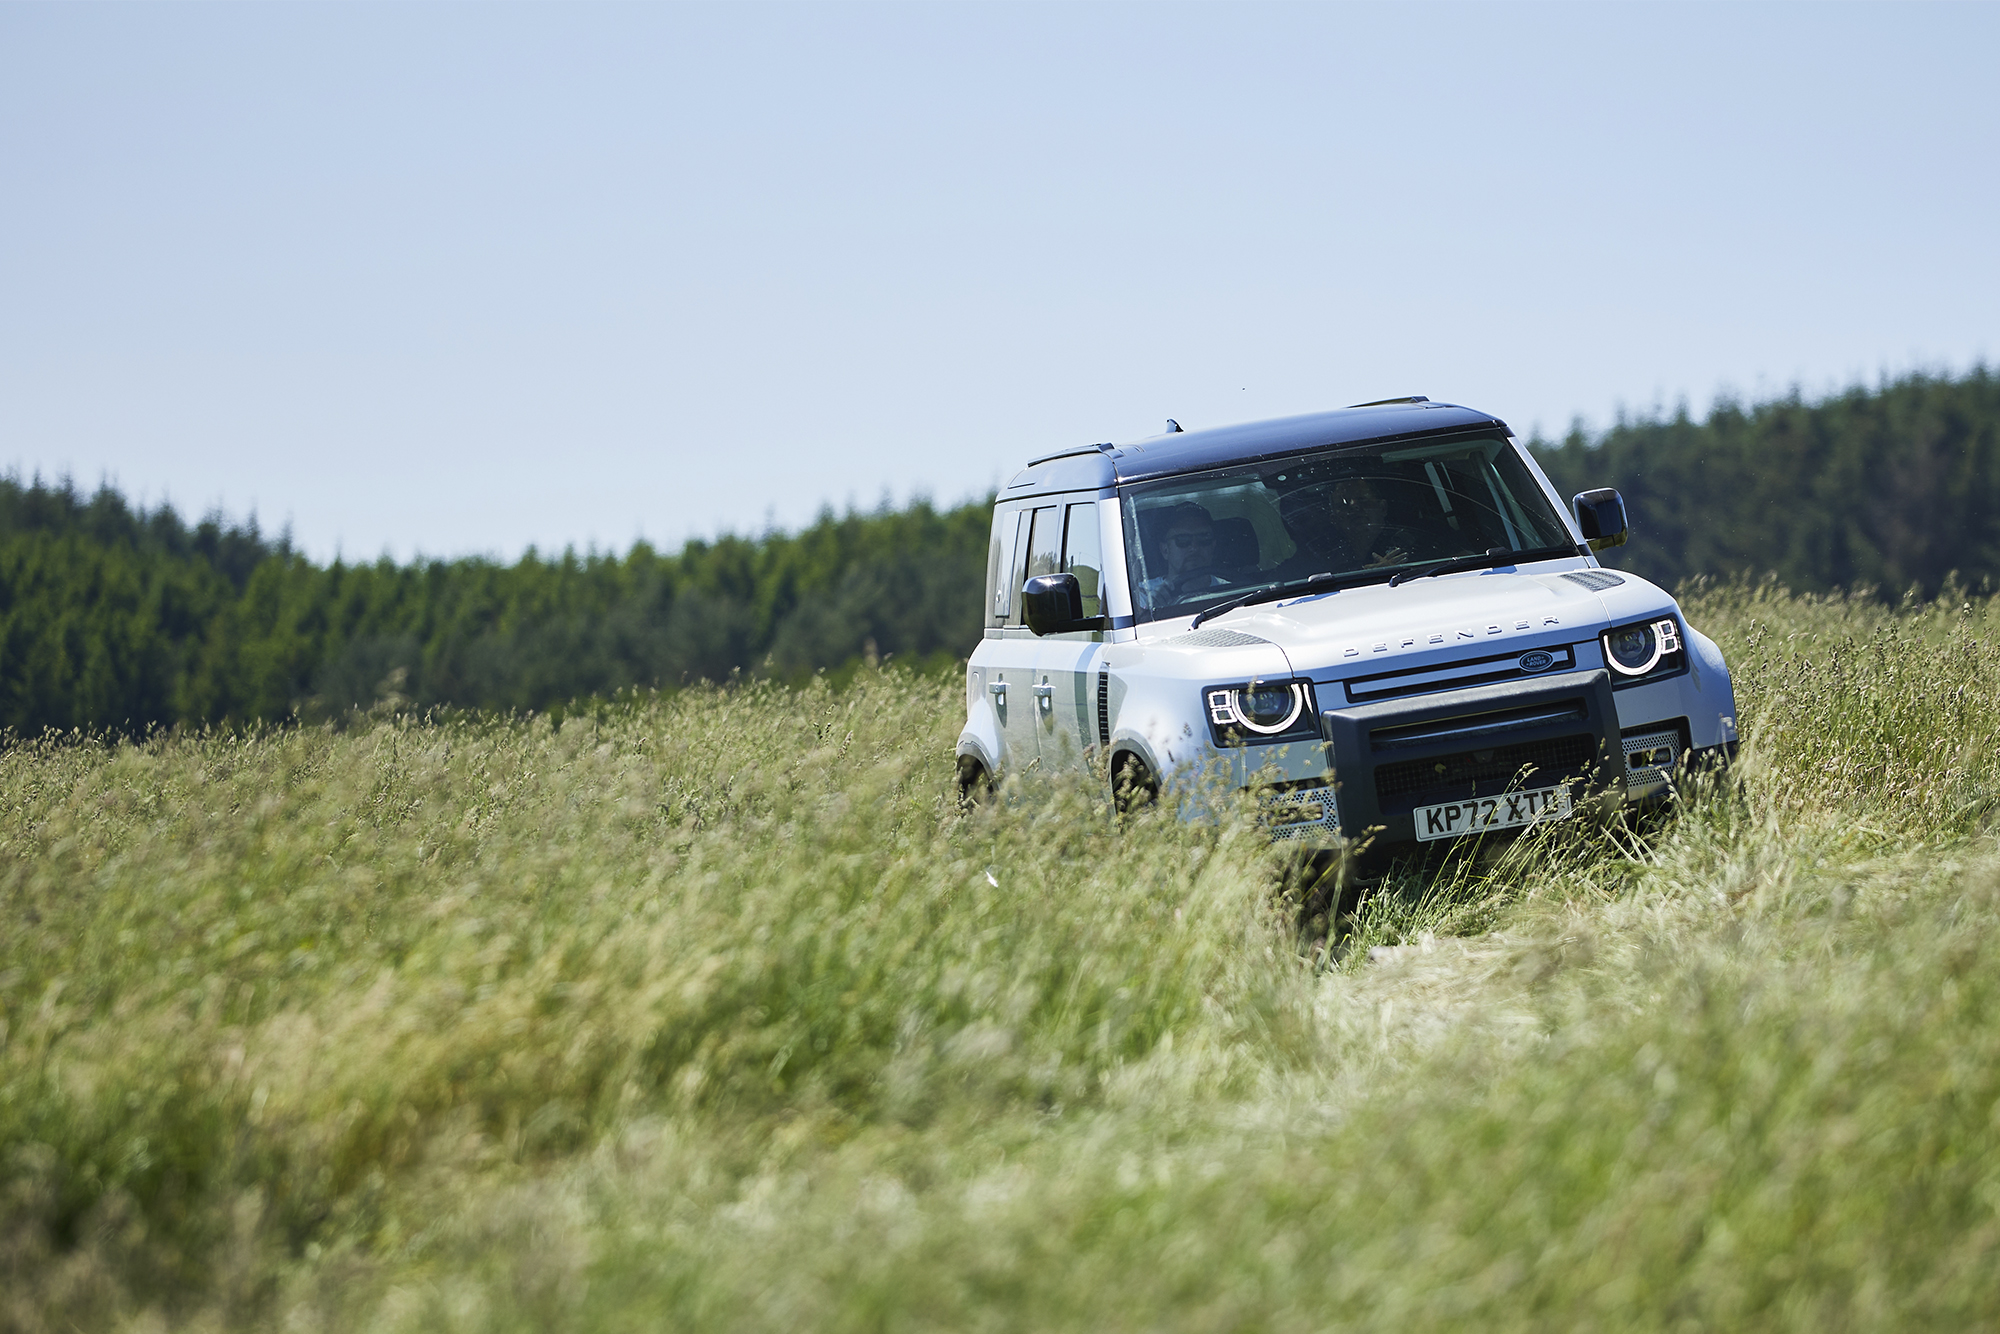 Land Rover Defender white, shot from the front, driving through a field on a sunny day